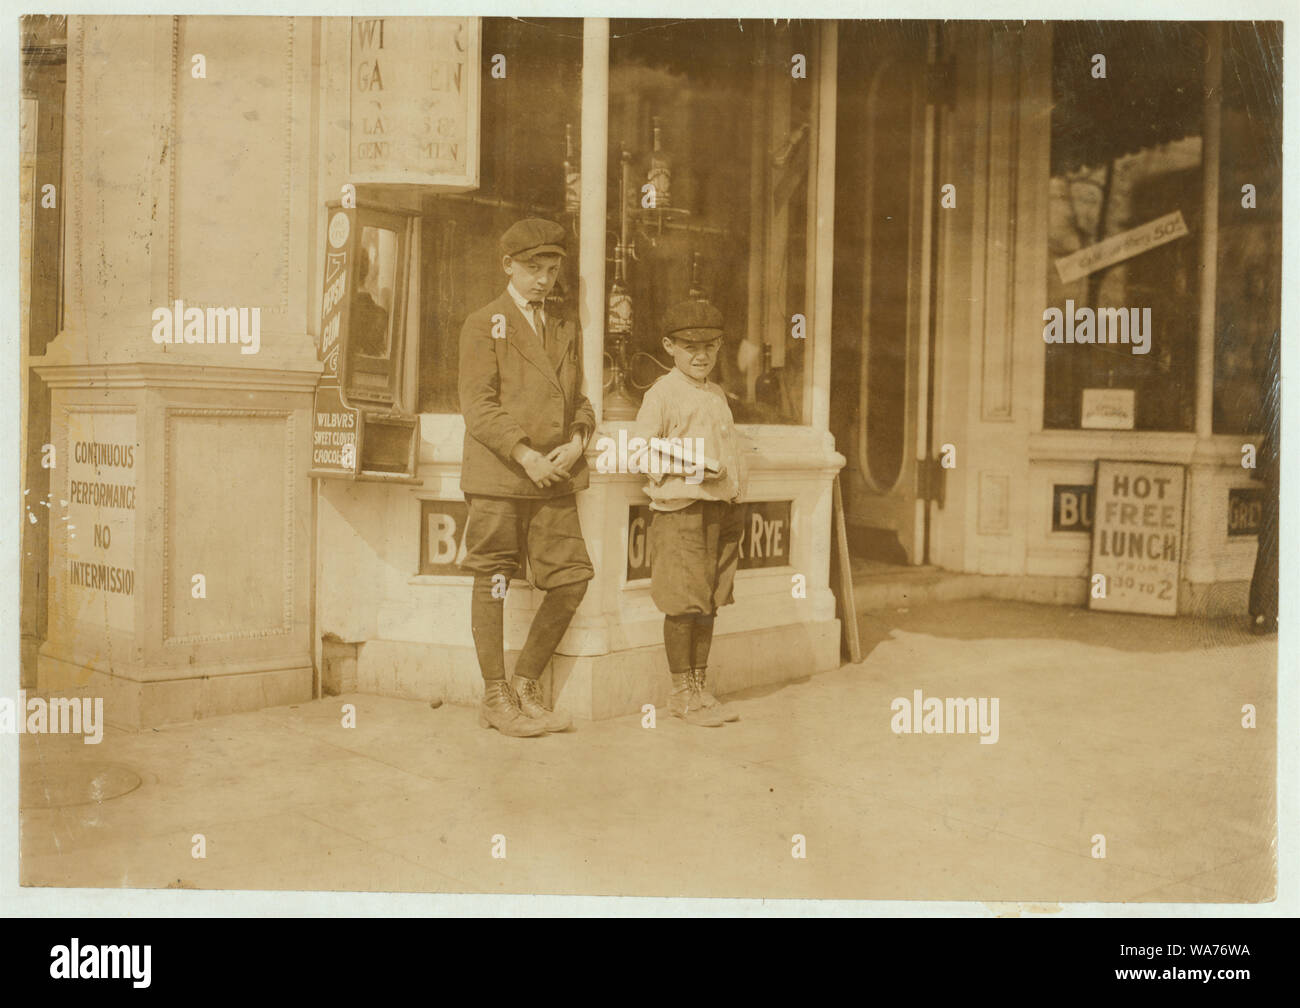 A 10 yr. old newsie, who had just been selling in this saloon for the other boy, his boss, E. Street, near 13th, Washington, D.C., The boss is Herbert Solomon, 452 D. St., N.W., Washington, D.C. 12 yrs. old. On April 19th I found Herbert selling at 1 A.M. The younger is Sam Goldstein, 458 P Street, N.W. Abstract: Photographs from the records of the National Child Labor Committee (U.S.) Stock Photo